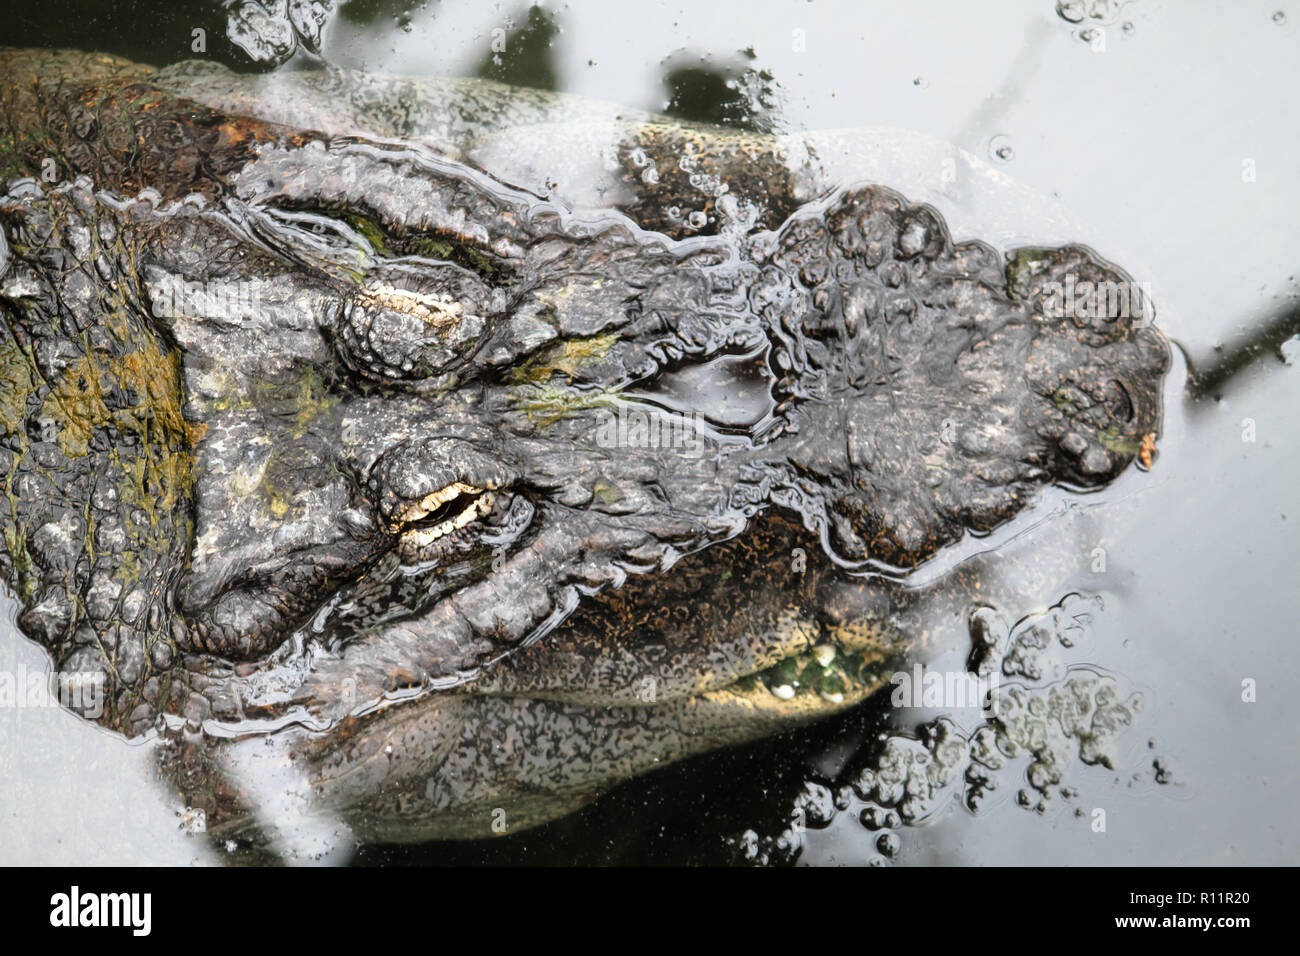 Crocodile close-up head seen from top perspective. Focus emphasizing the animal head partly submerged on water the two eyes and the rough skin pattern Stock Photo